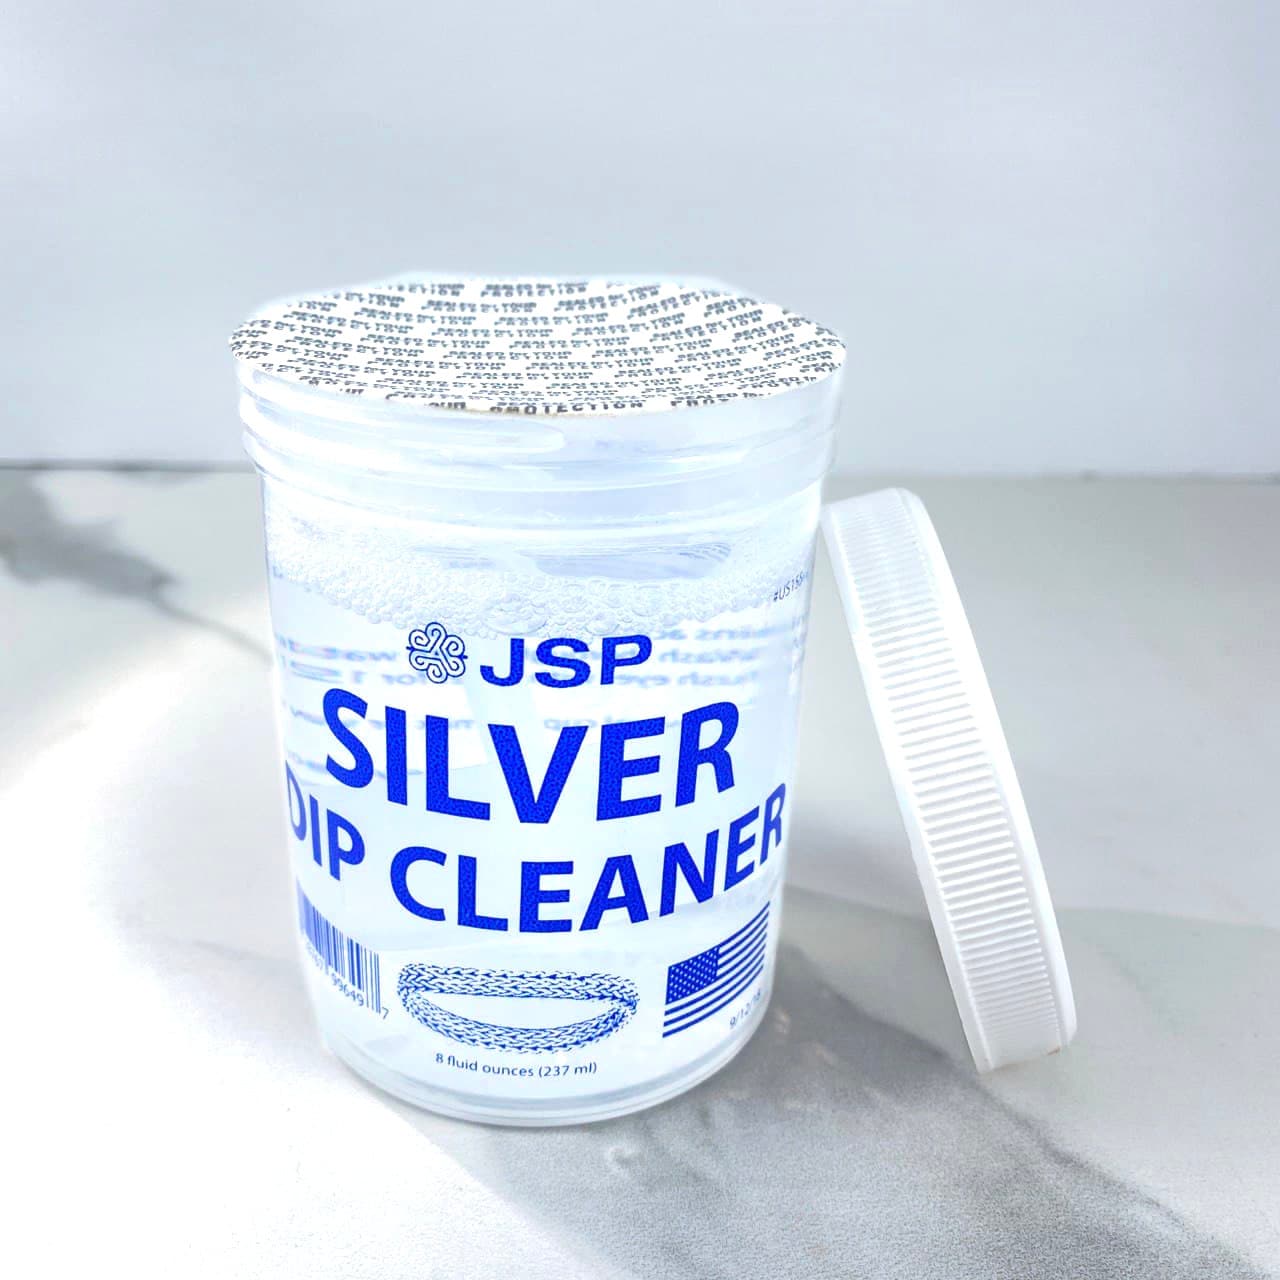 Silver Coin and Jewelry Cleaner, 8 fl oz, 237ml with Dipping Basket